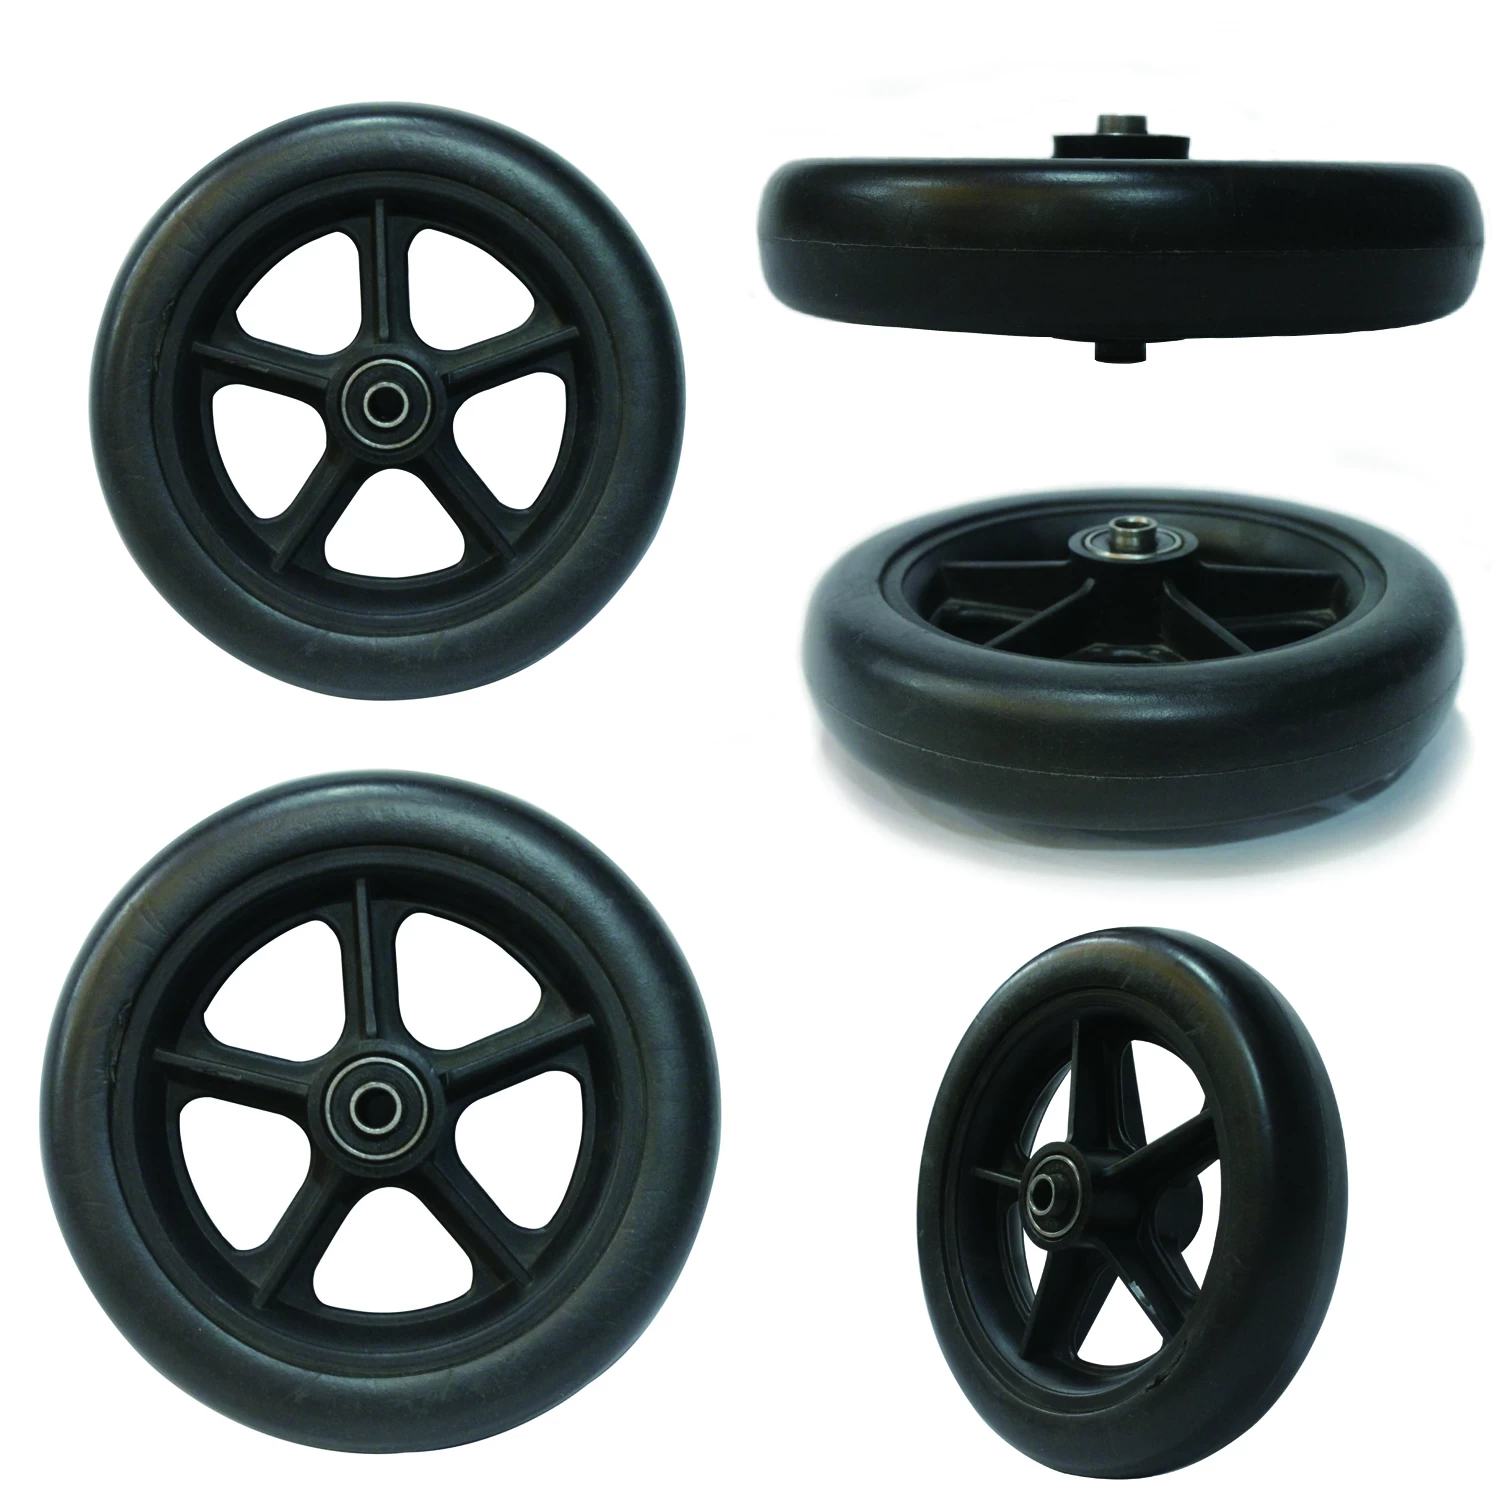 Manufacture solid wheels,solid rubber toy wheels,air free wheels,PU foam air free wheels